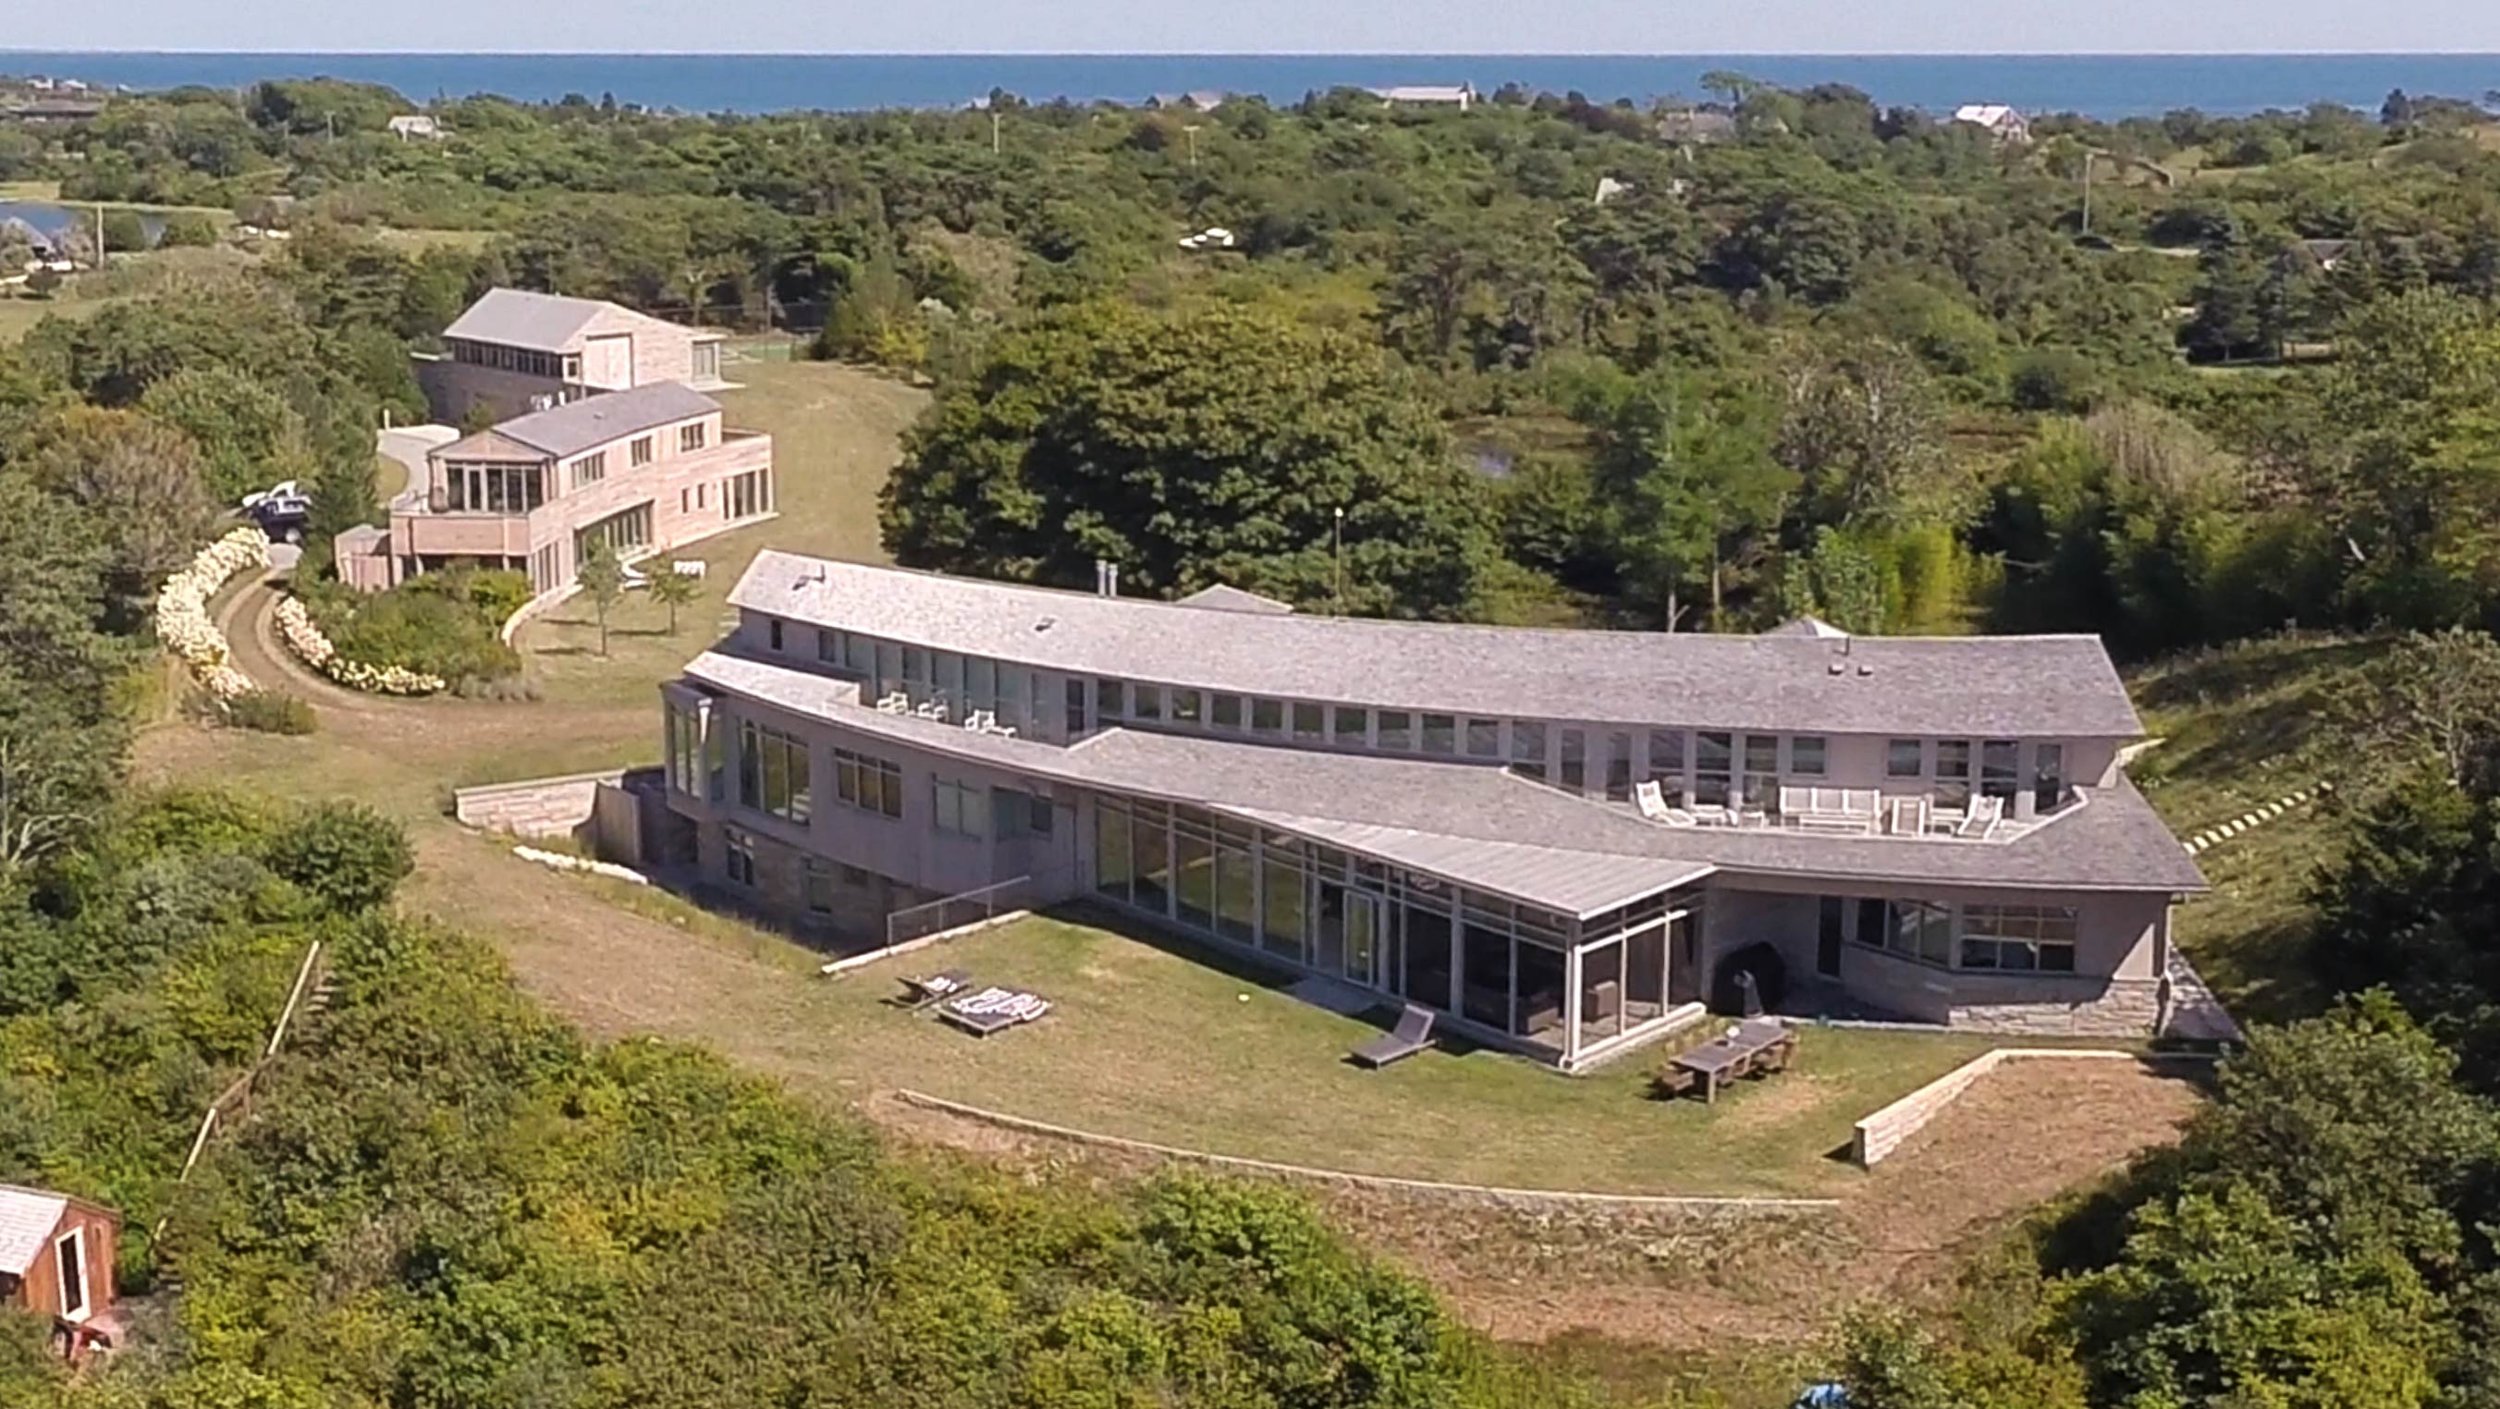 A Martha's Vineyard mansion with accessory buildings